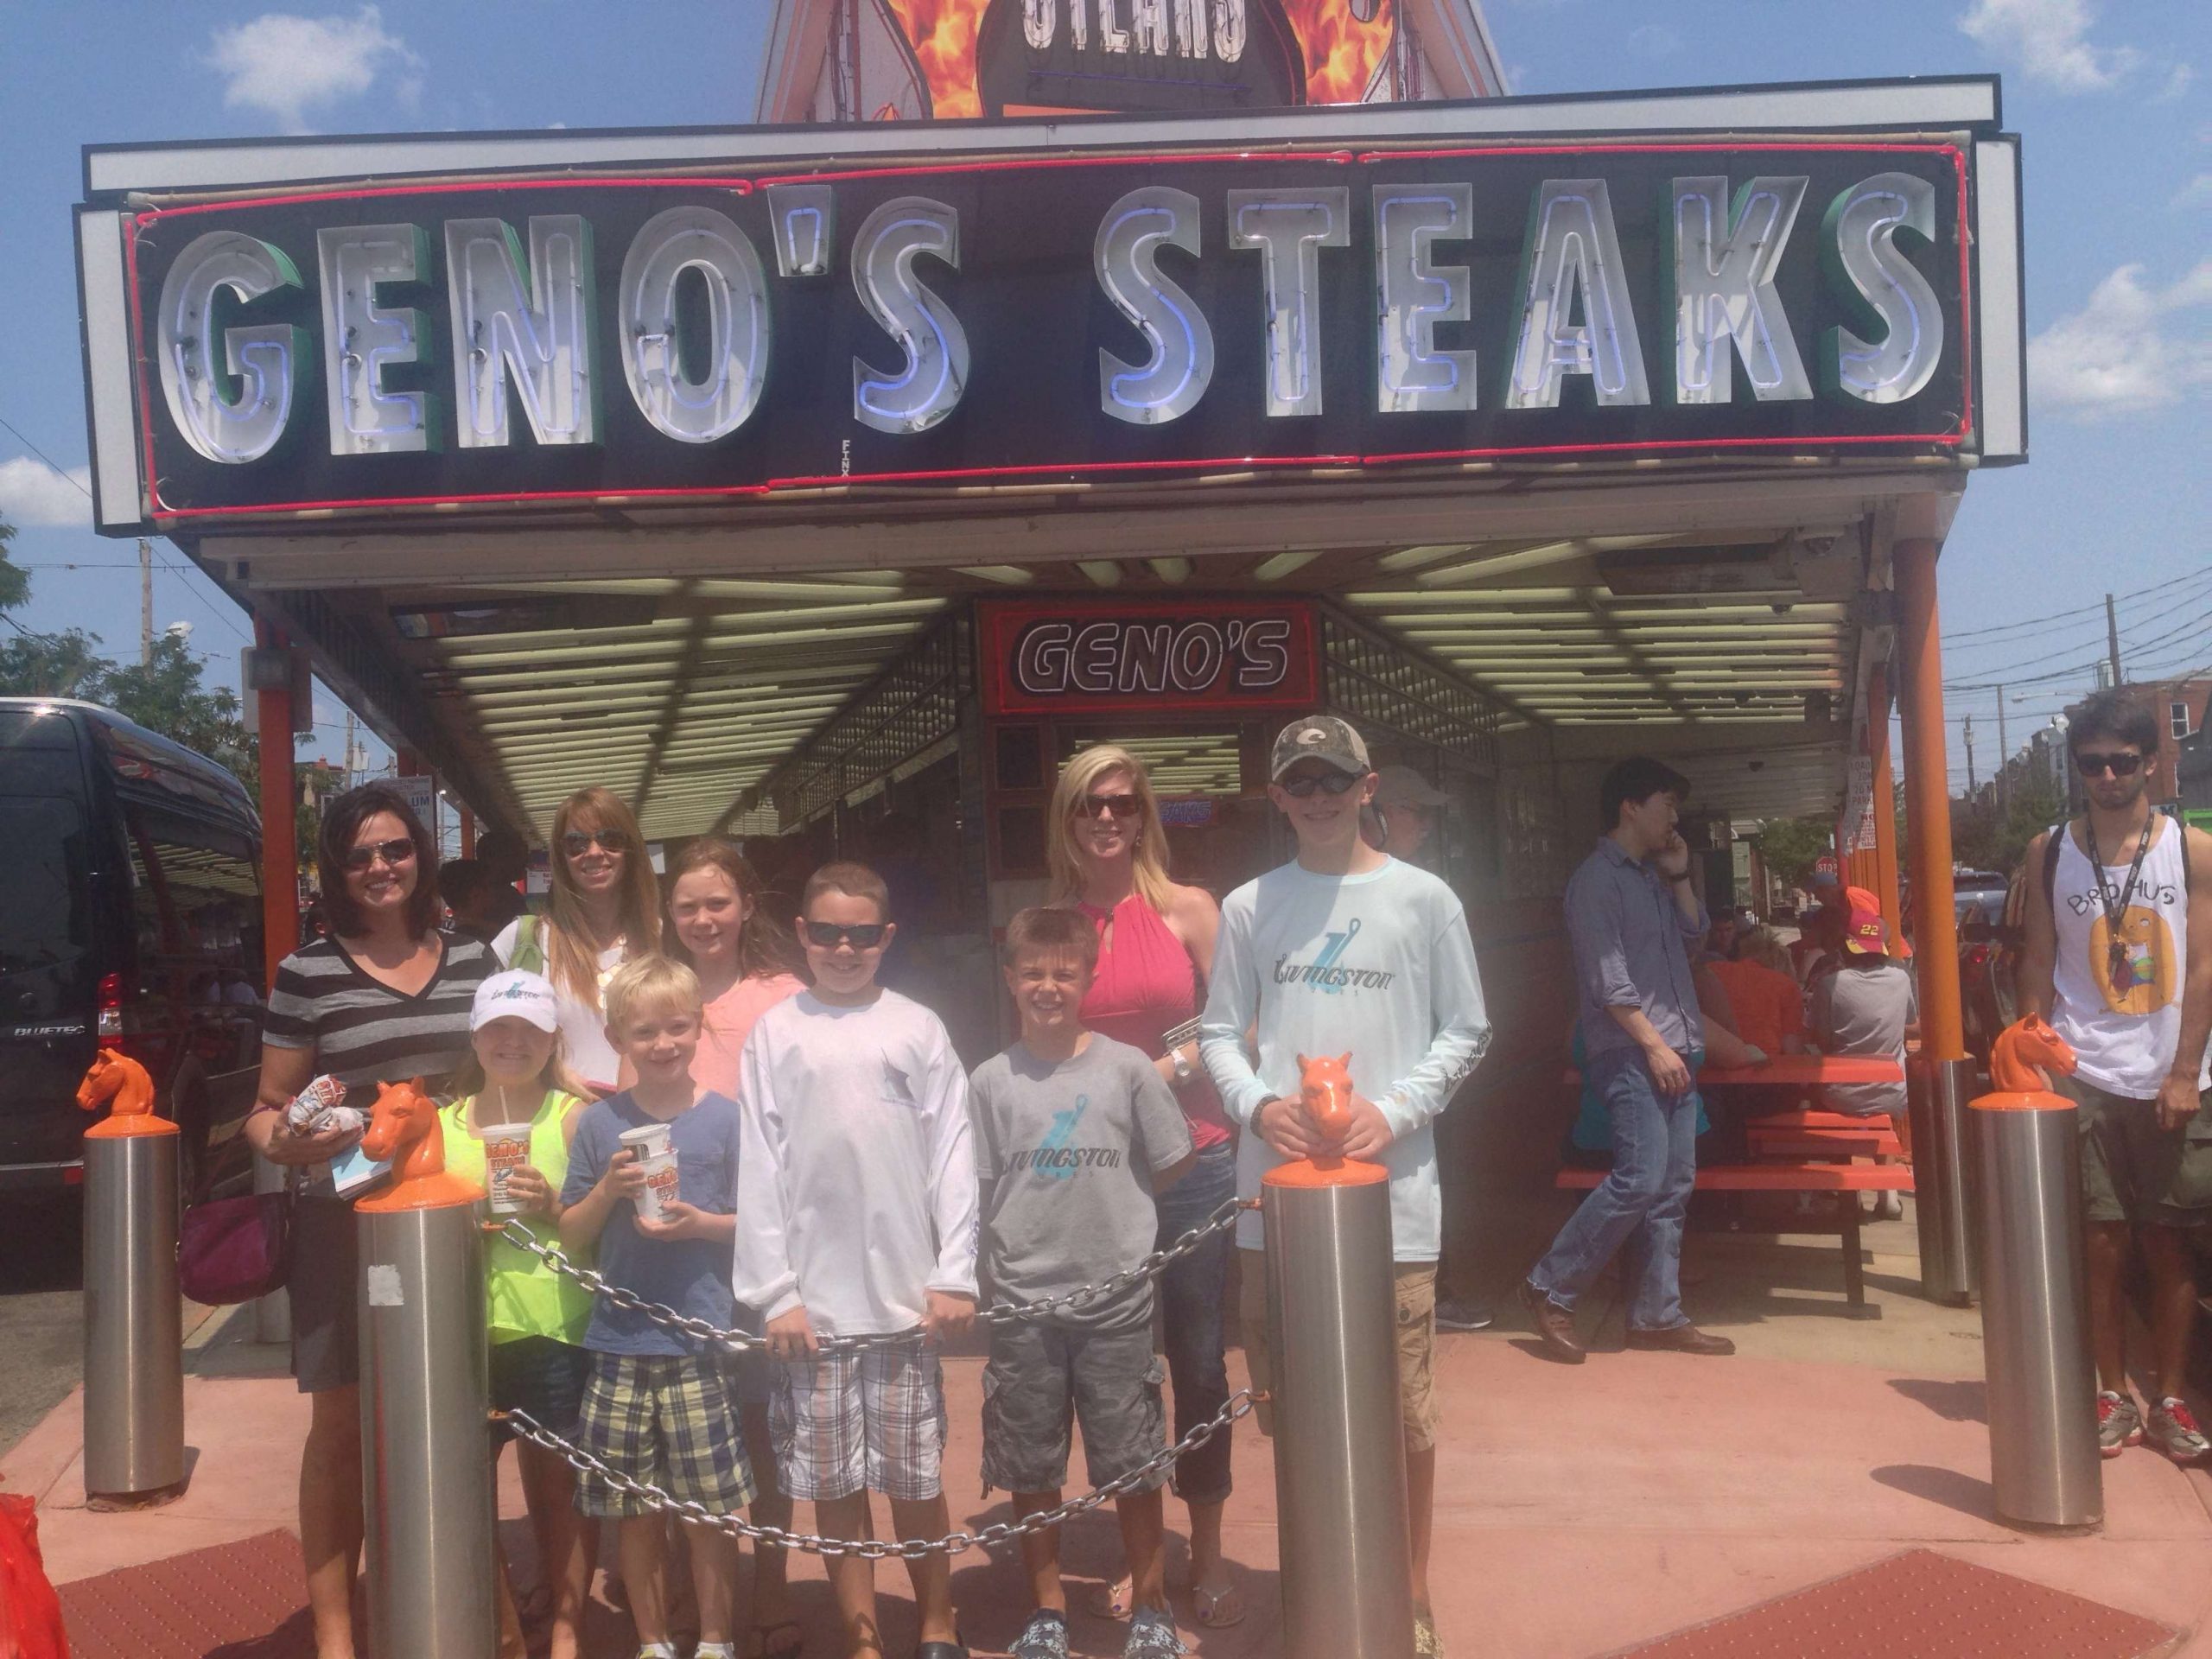 Lunch at Geno's Steaks with the Martens and Chapmans.